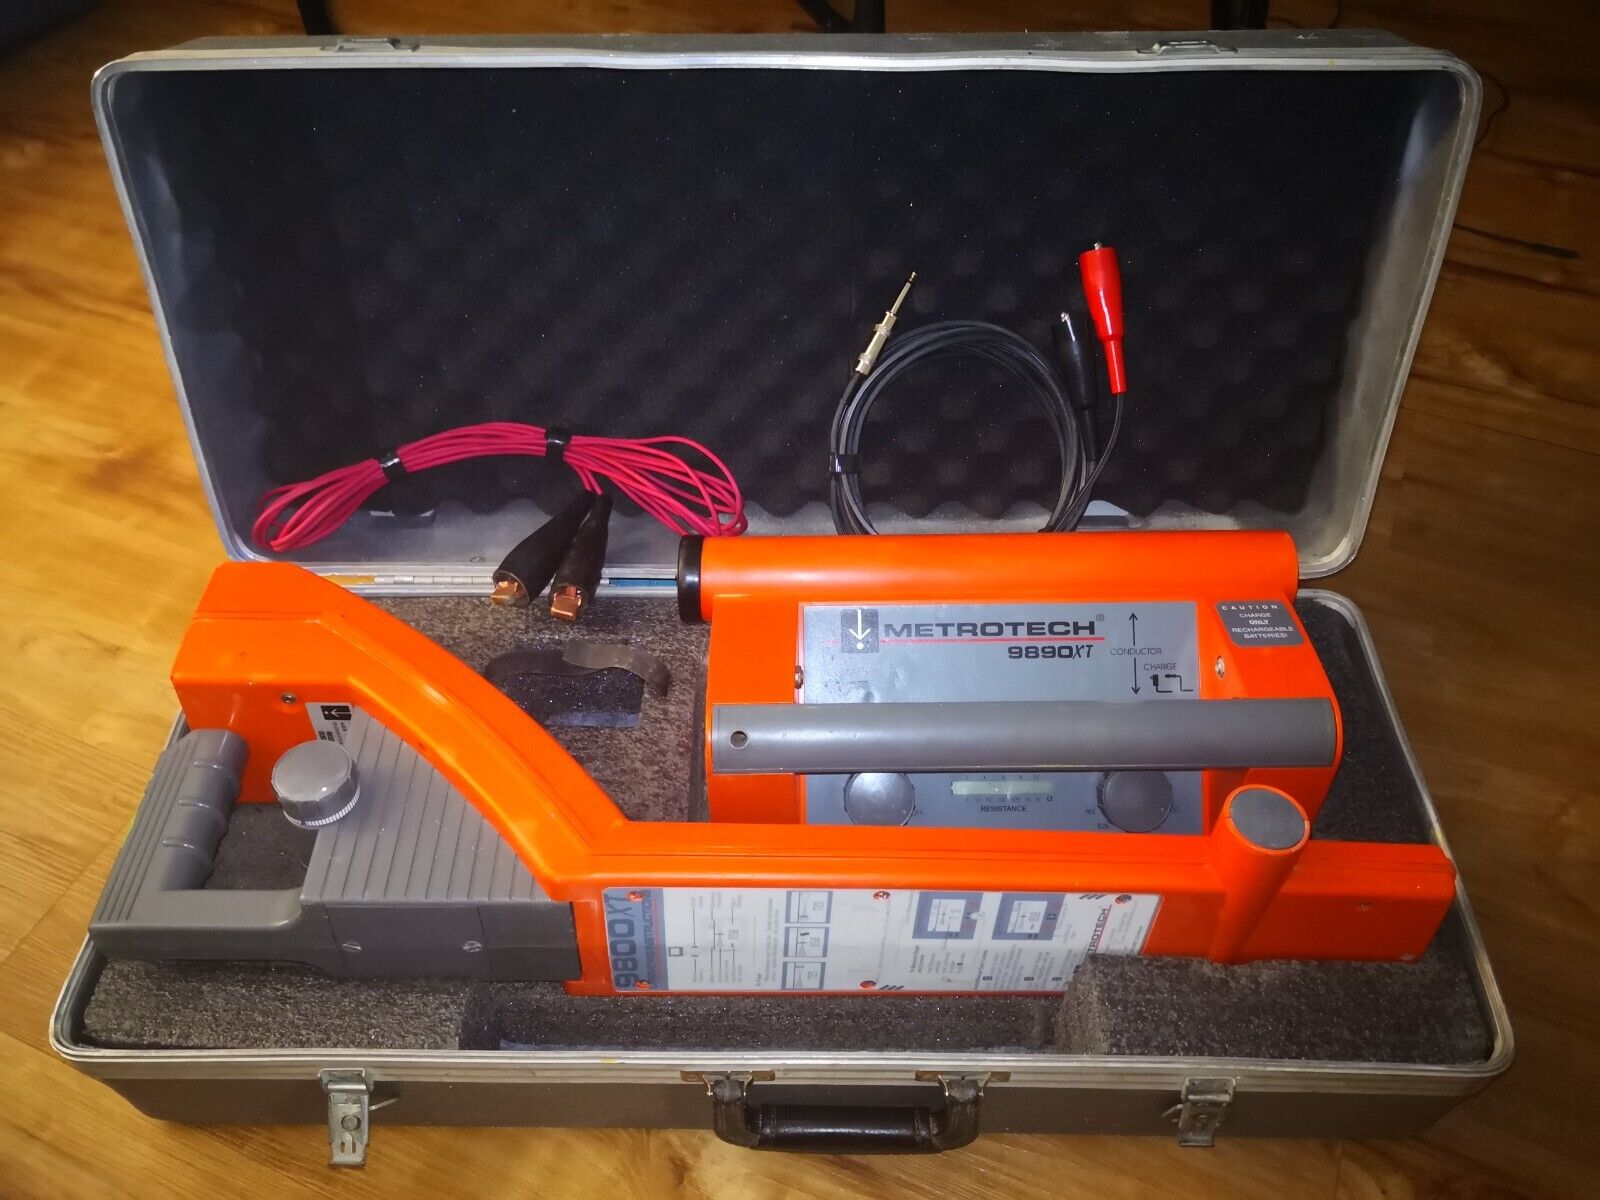 Metrotech 9800xt Underground Utility Locator Set. Fully Tested. Ready To Use.